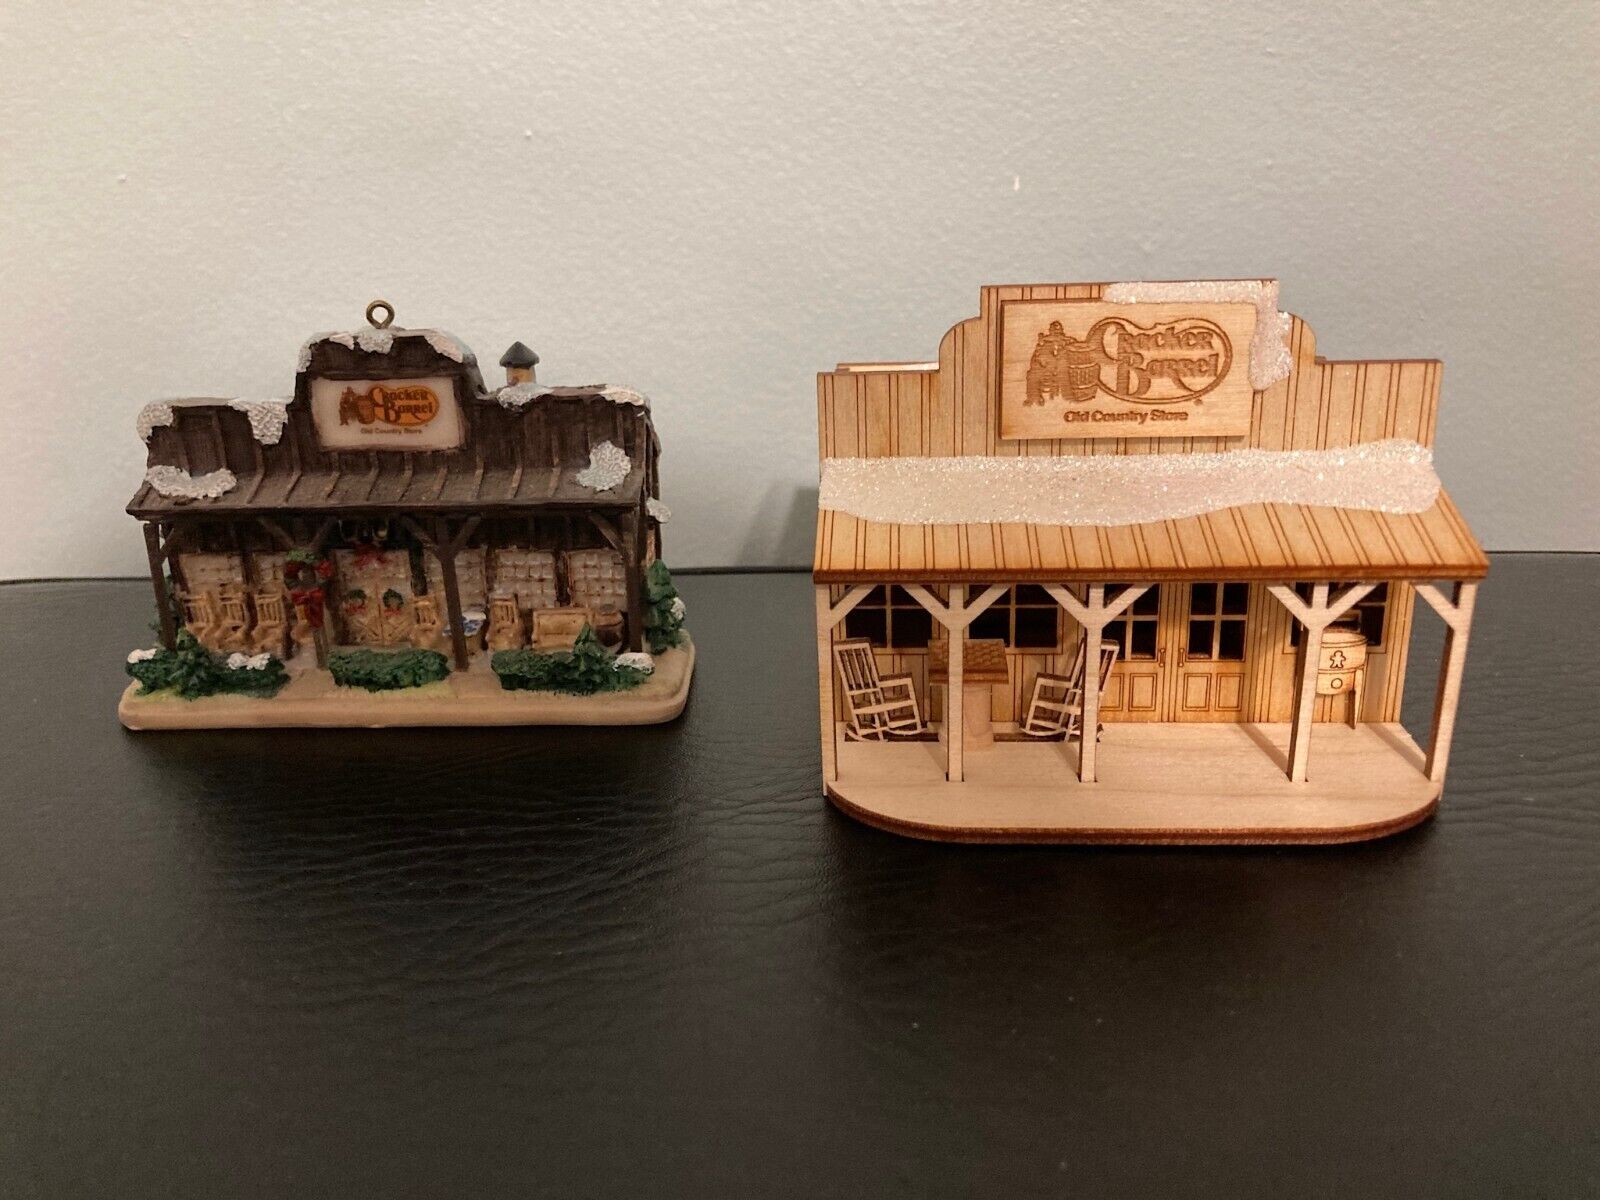 2 Cracker Barrel Ornaments - 2005 Old Country Store & 2013 Ginger Cottages Wood